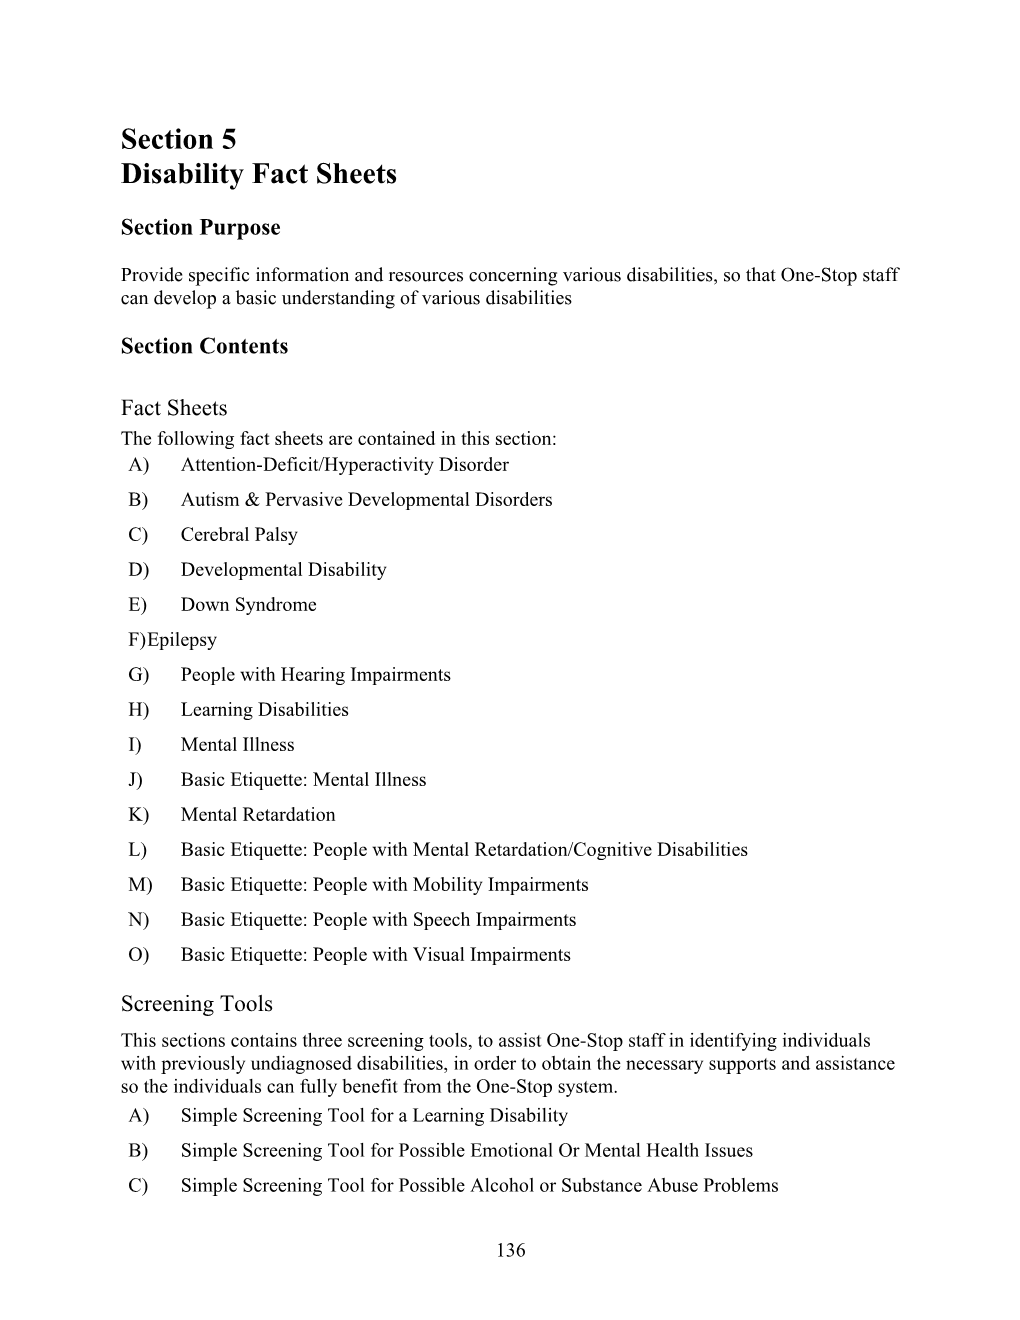 Disability Fact Sheets